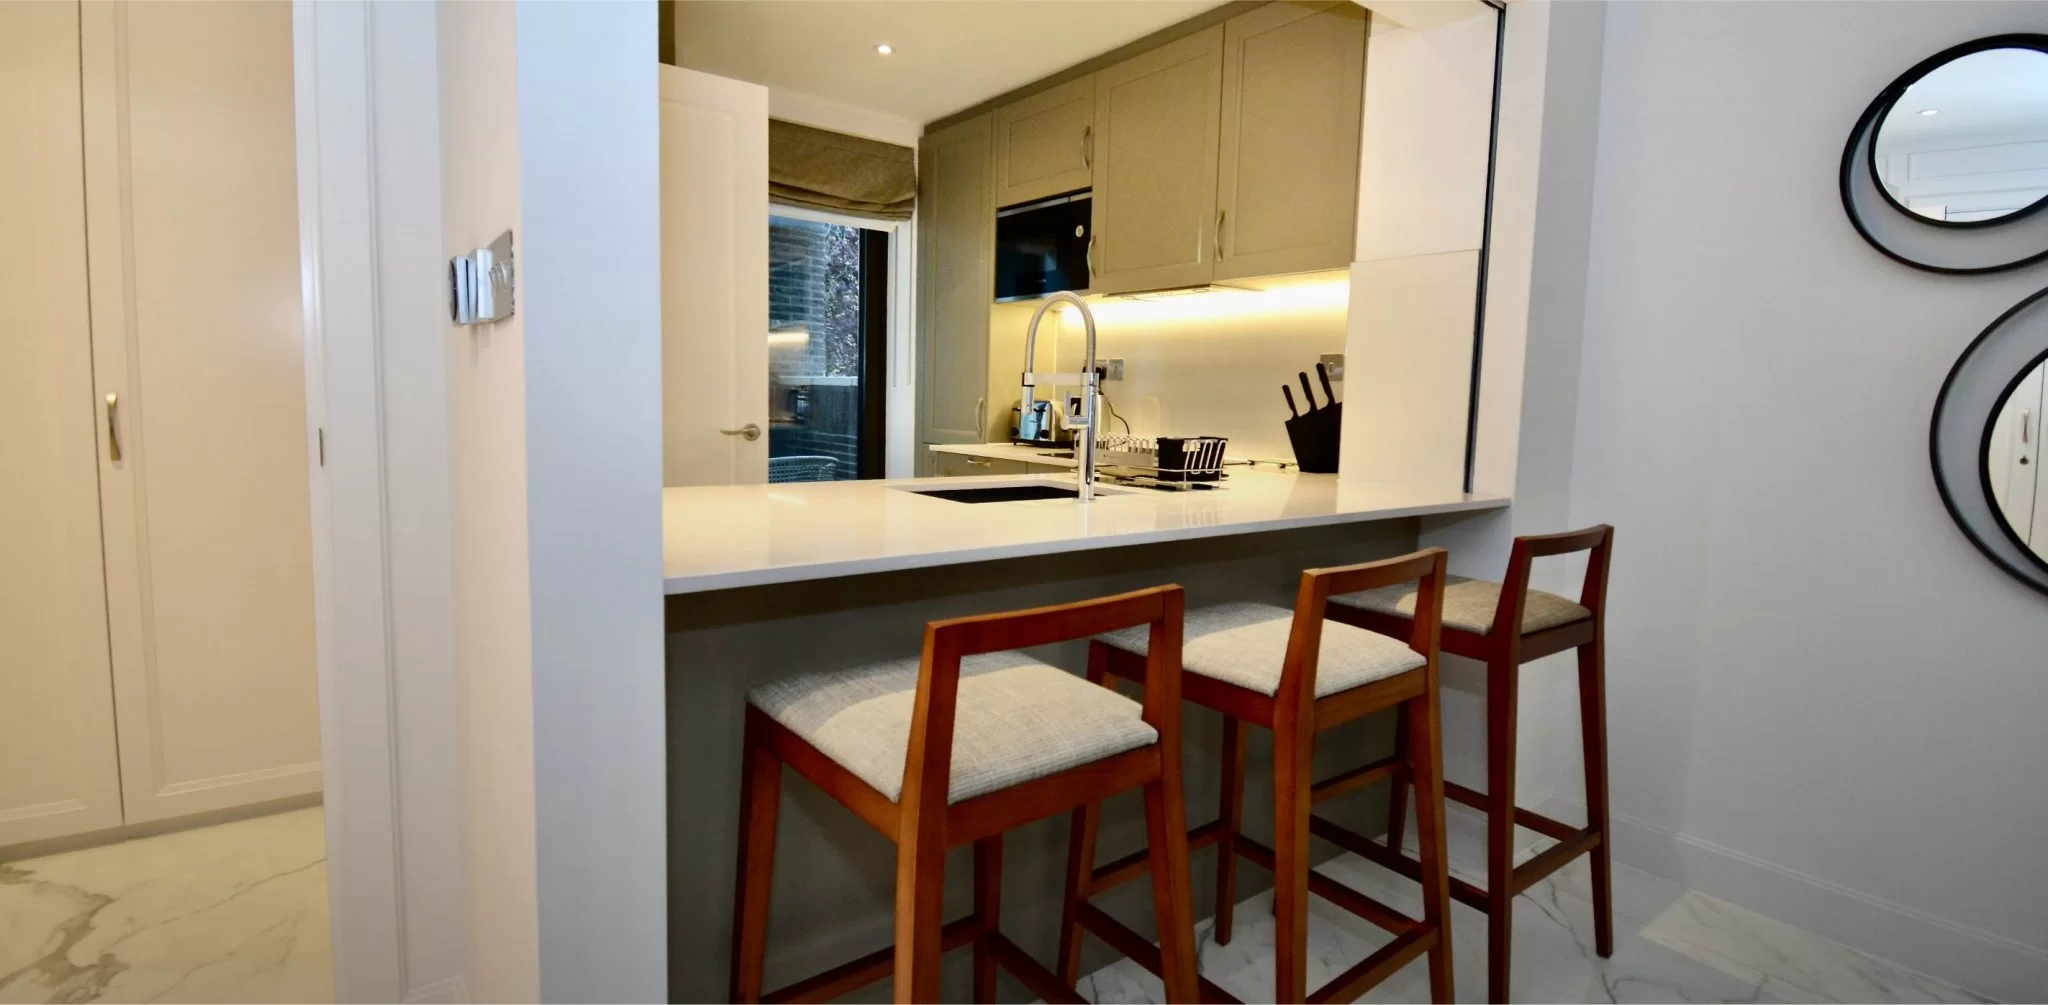 5. 3 Bed Apartments Dining